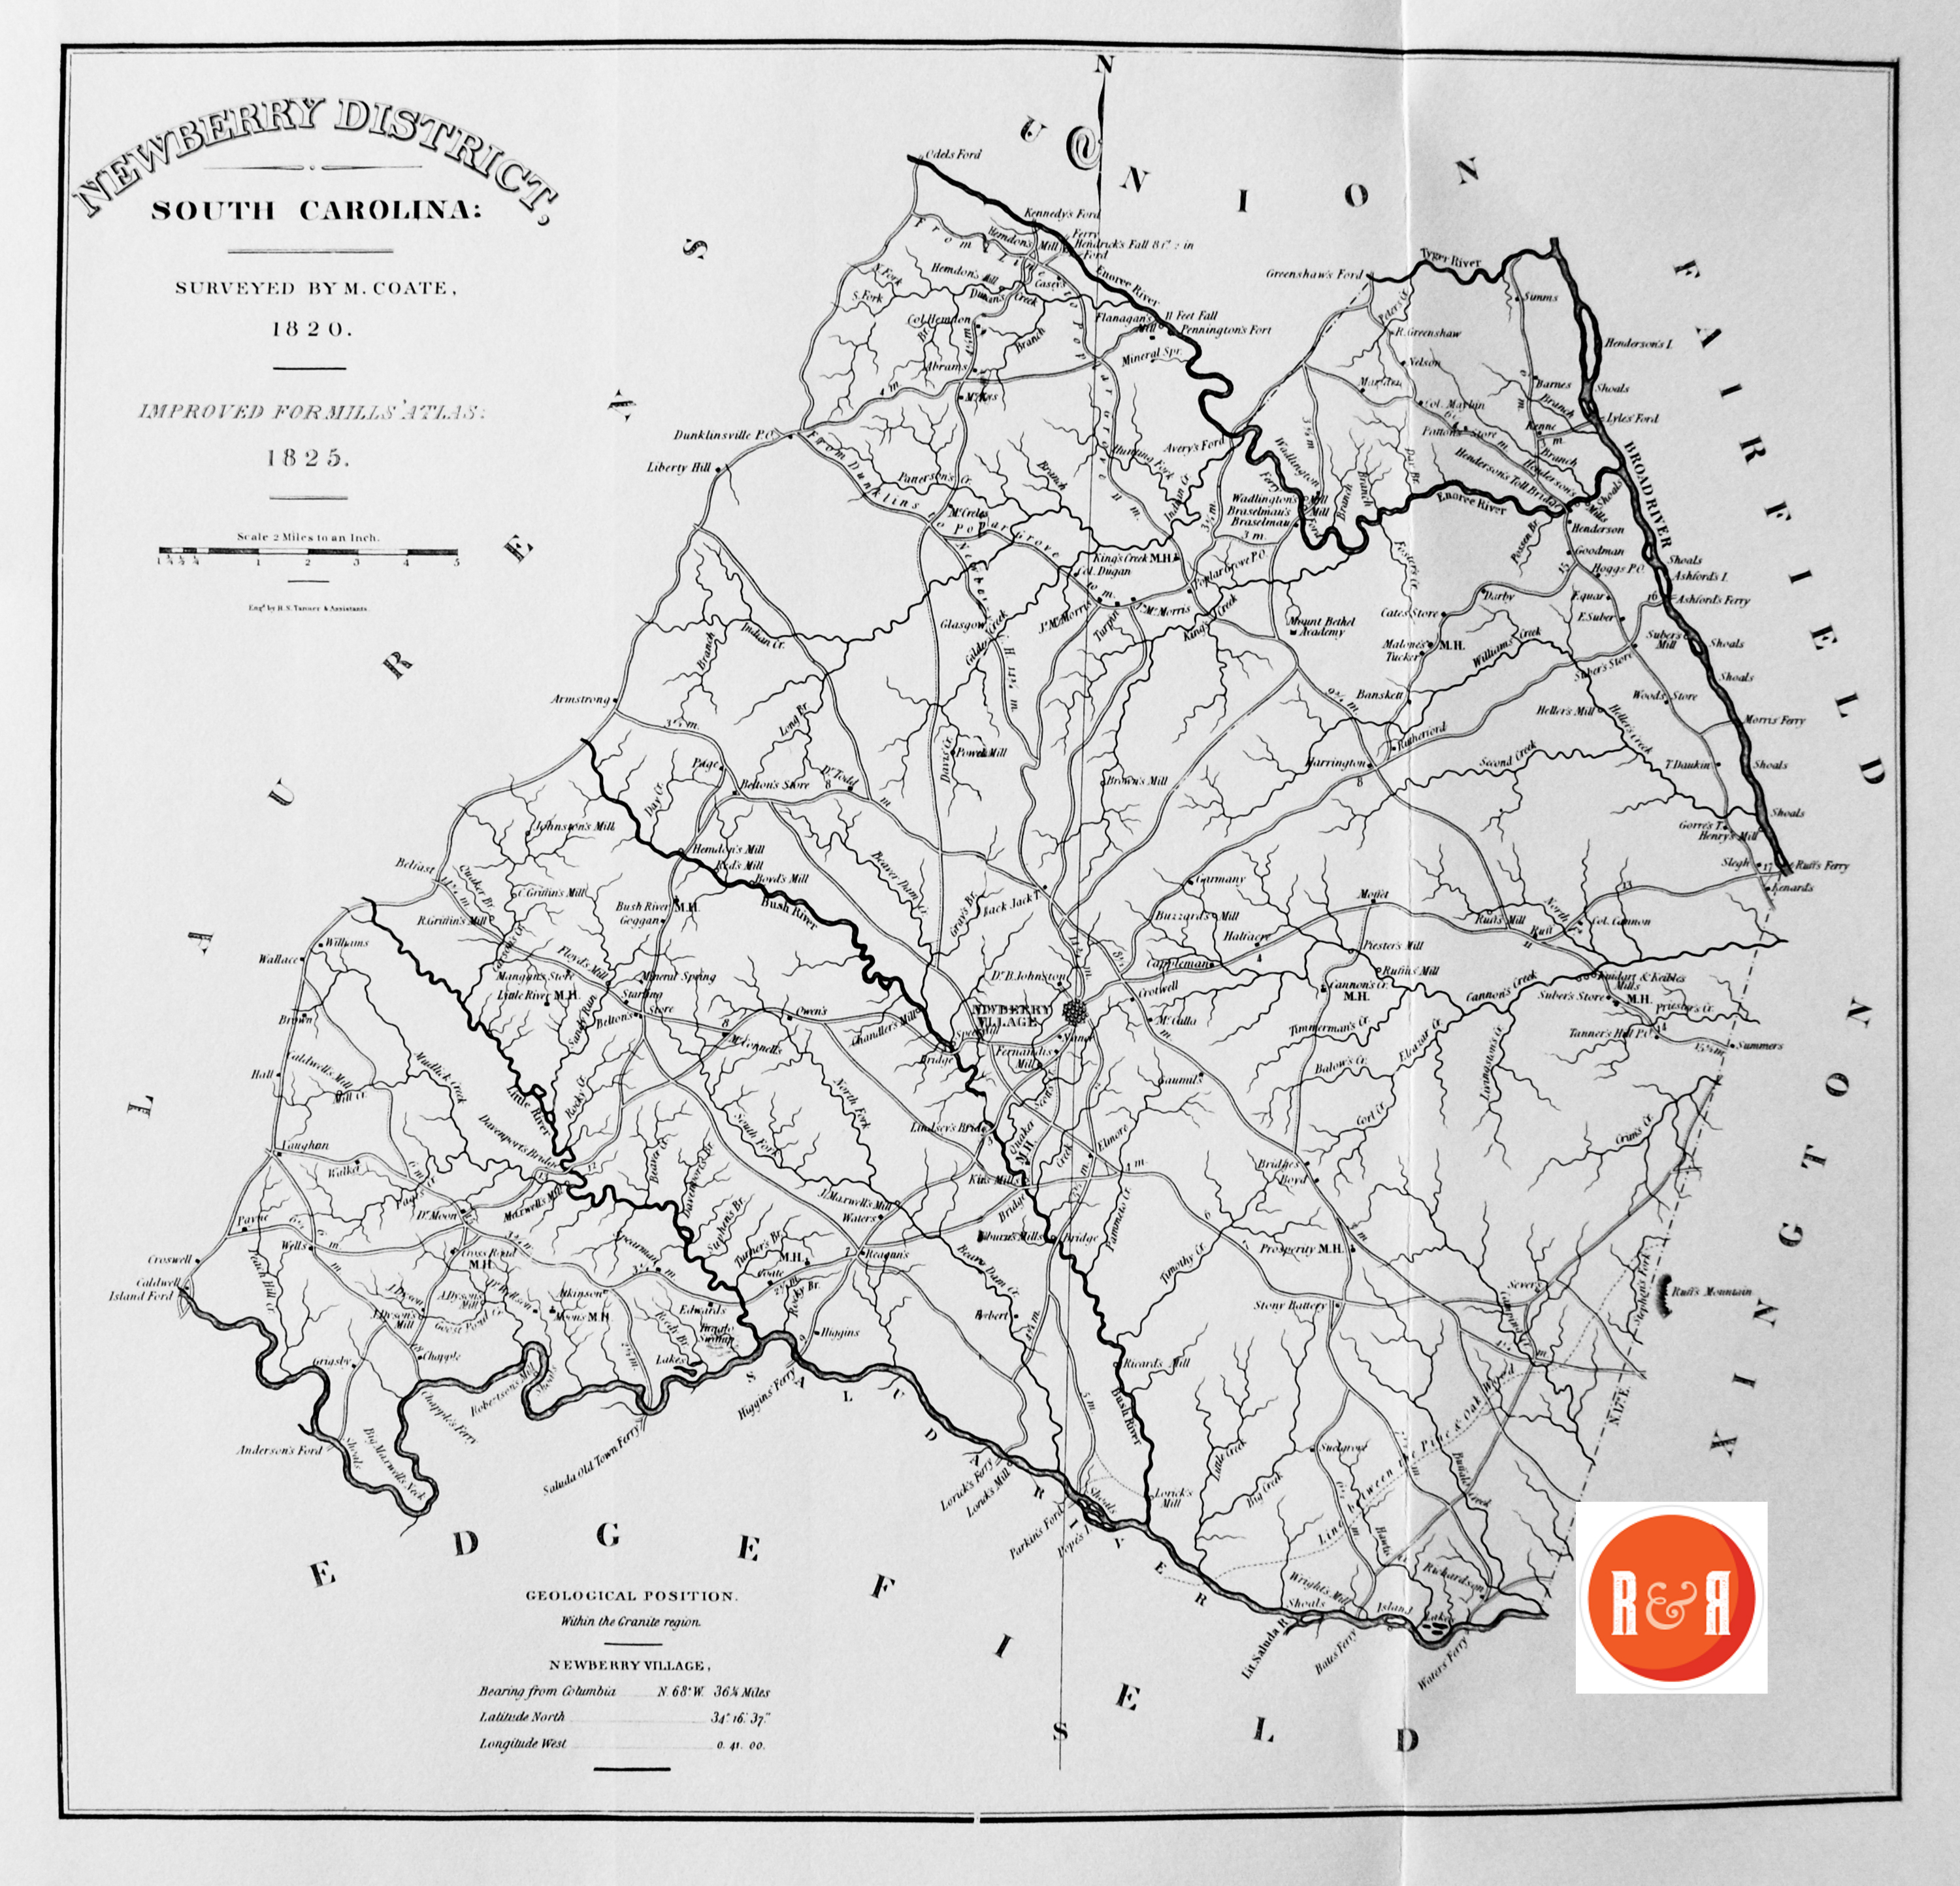 OVERALL NEWBERRY CO MAP